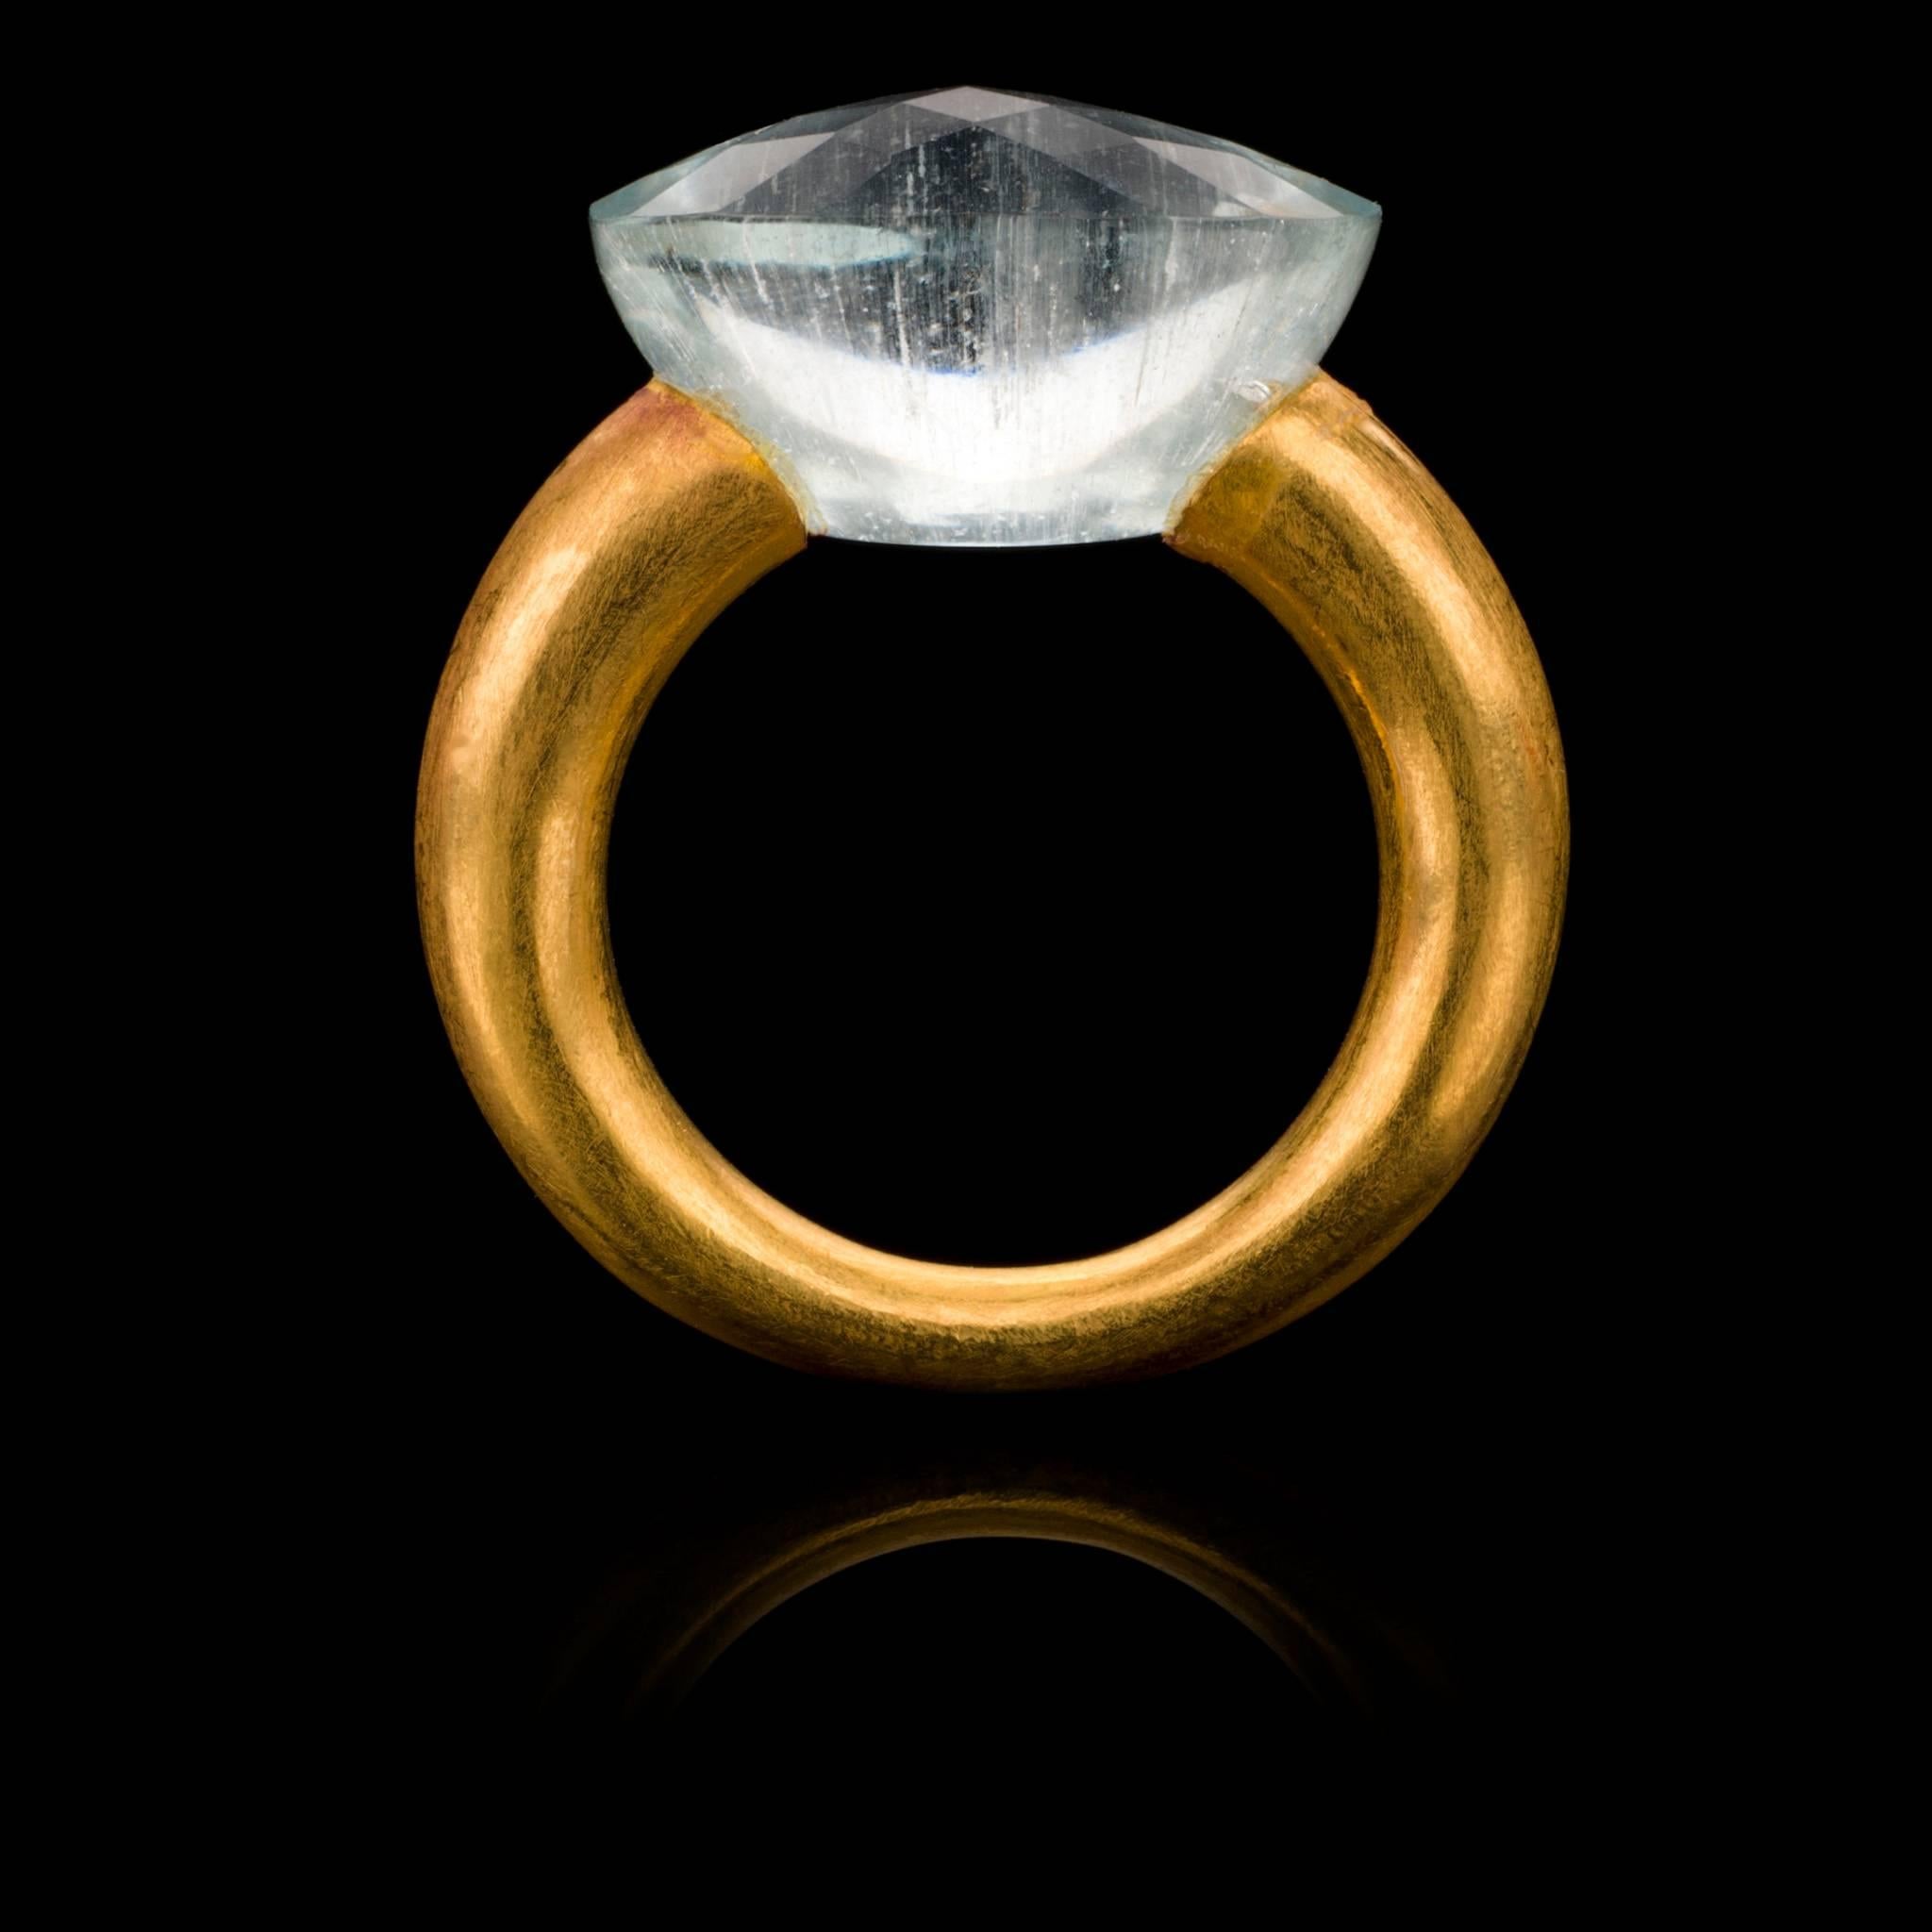 Unique 18 karat brushed gold ring holding a large, faceted oval cut aquamarine. The simplicity of the design puts the stone centre stage and gives it the opportunity to truly dazzle! The ring is hand made using ancient Indian techniques that have